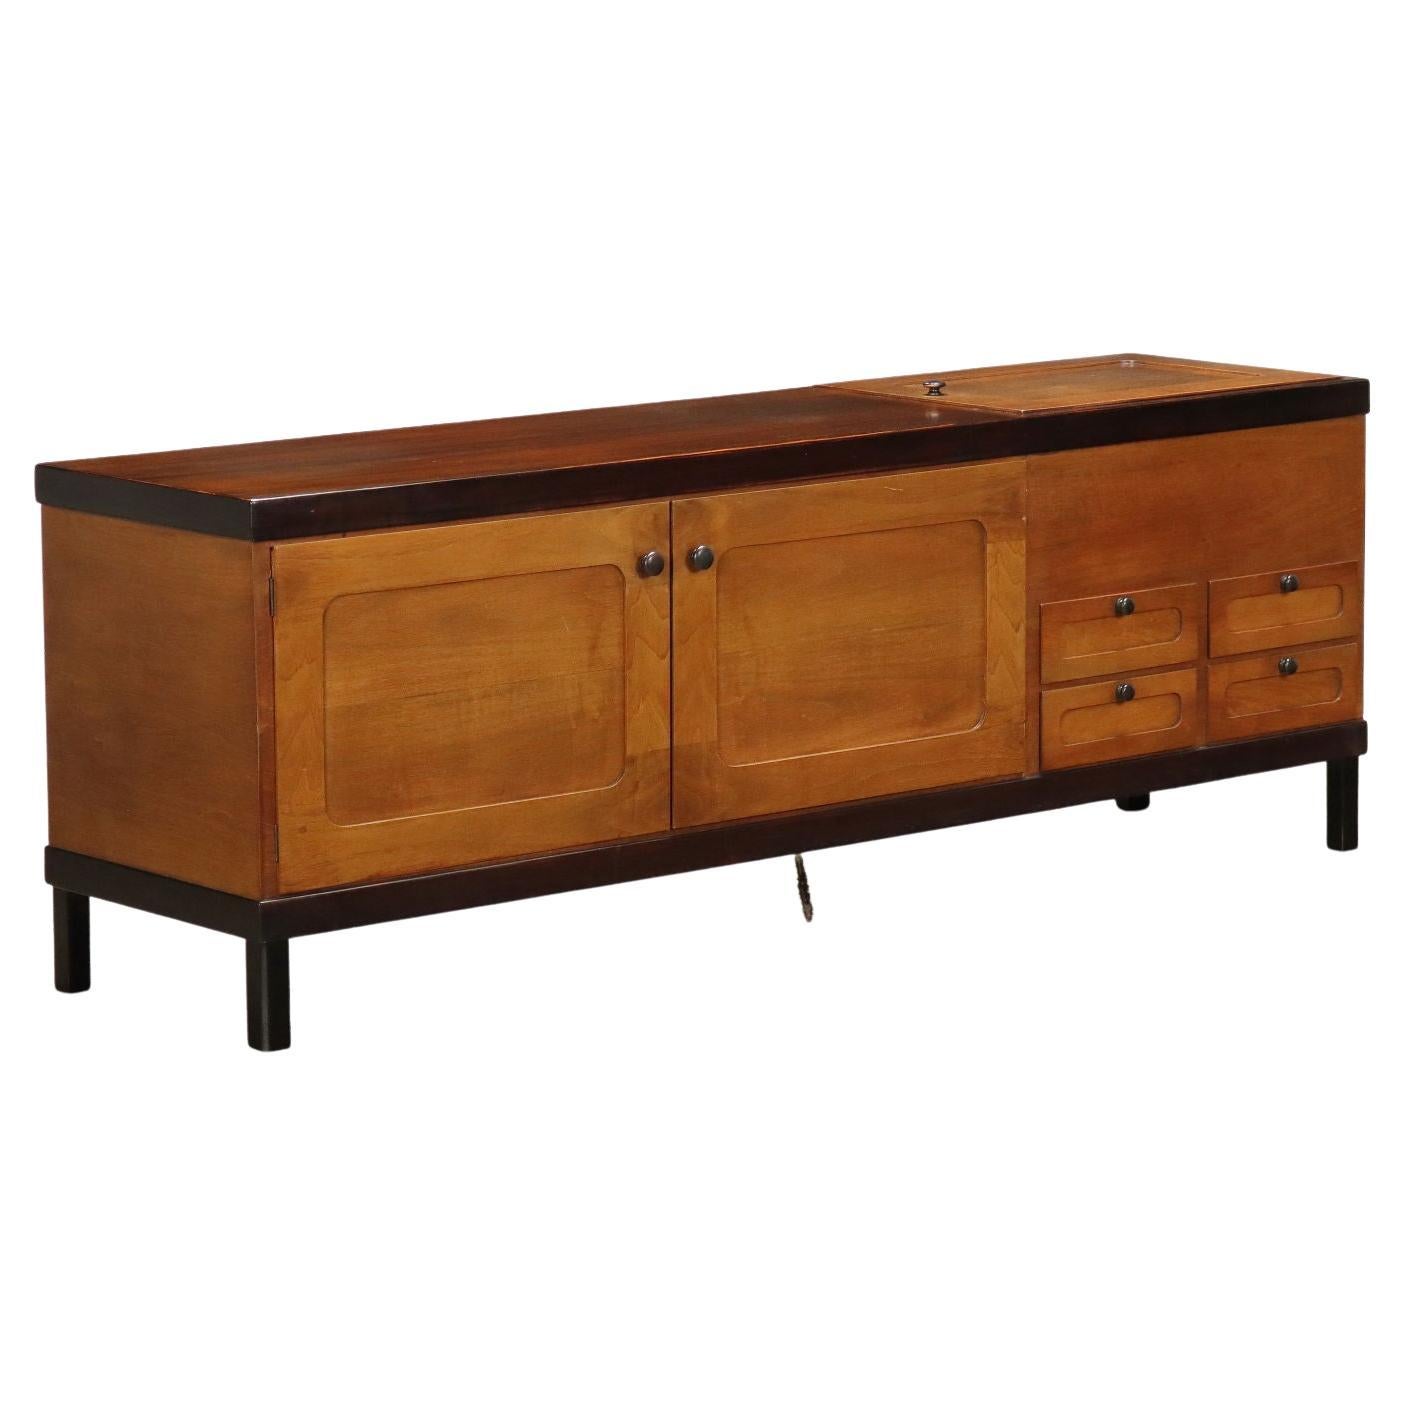 Elam Sideboard by Piero Ranzani Exotic Wood, Italy, 1960s-70s For Sale